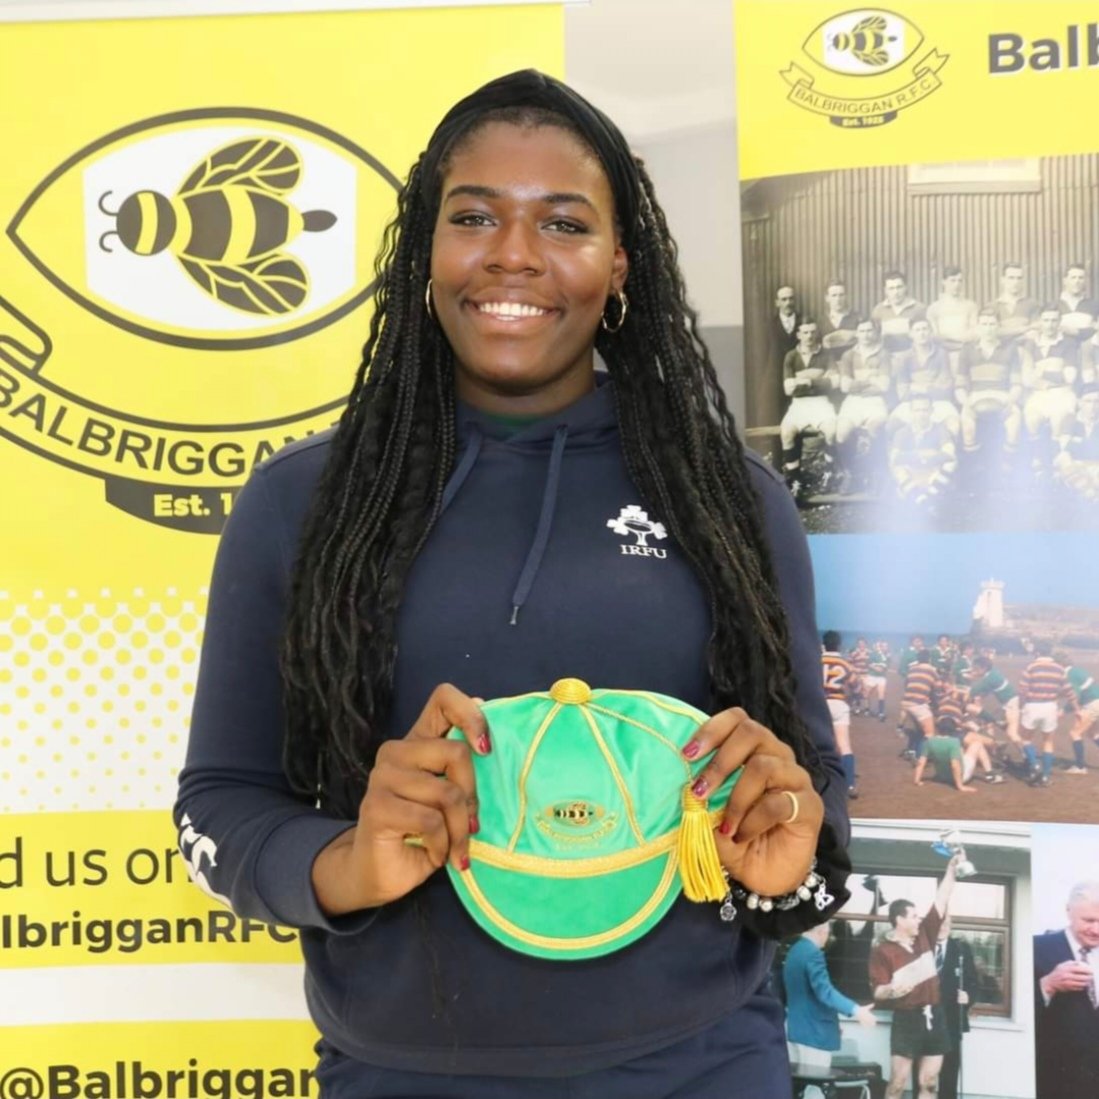 Everyone at Balbriggan RFC couldn't be prouder of Alma and all that she has achieved so far. We are all very excited to see what the future brings for her. Congratulations on all your successes so far and no doubt there will be many more. 🐝